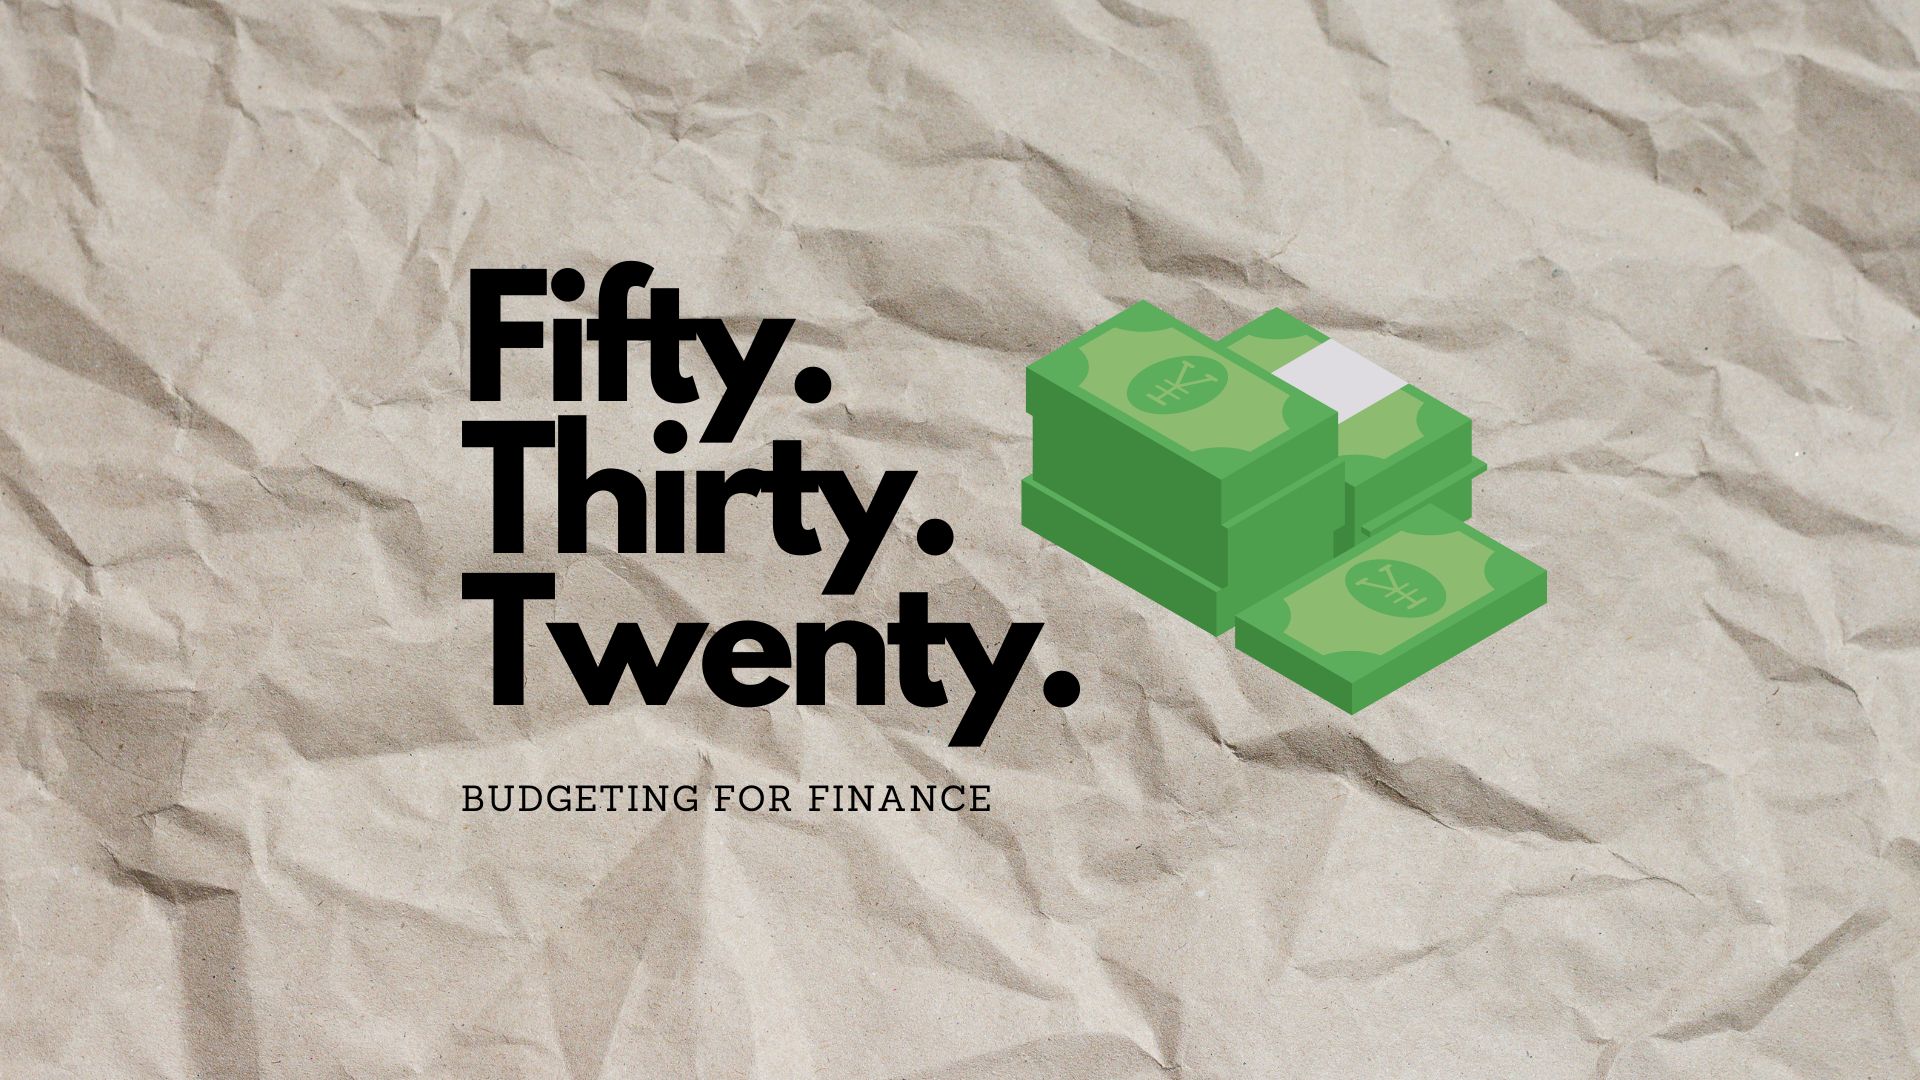 The fifty-thirty-twenty rule for budgeting.